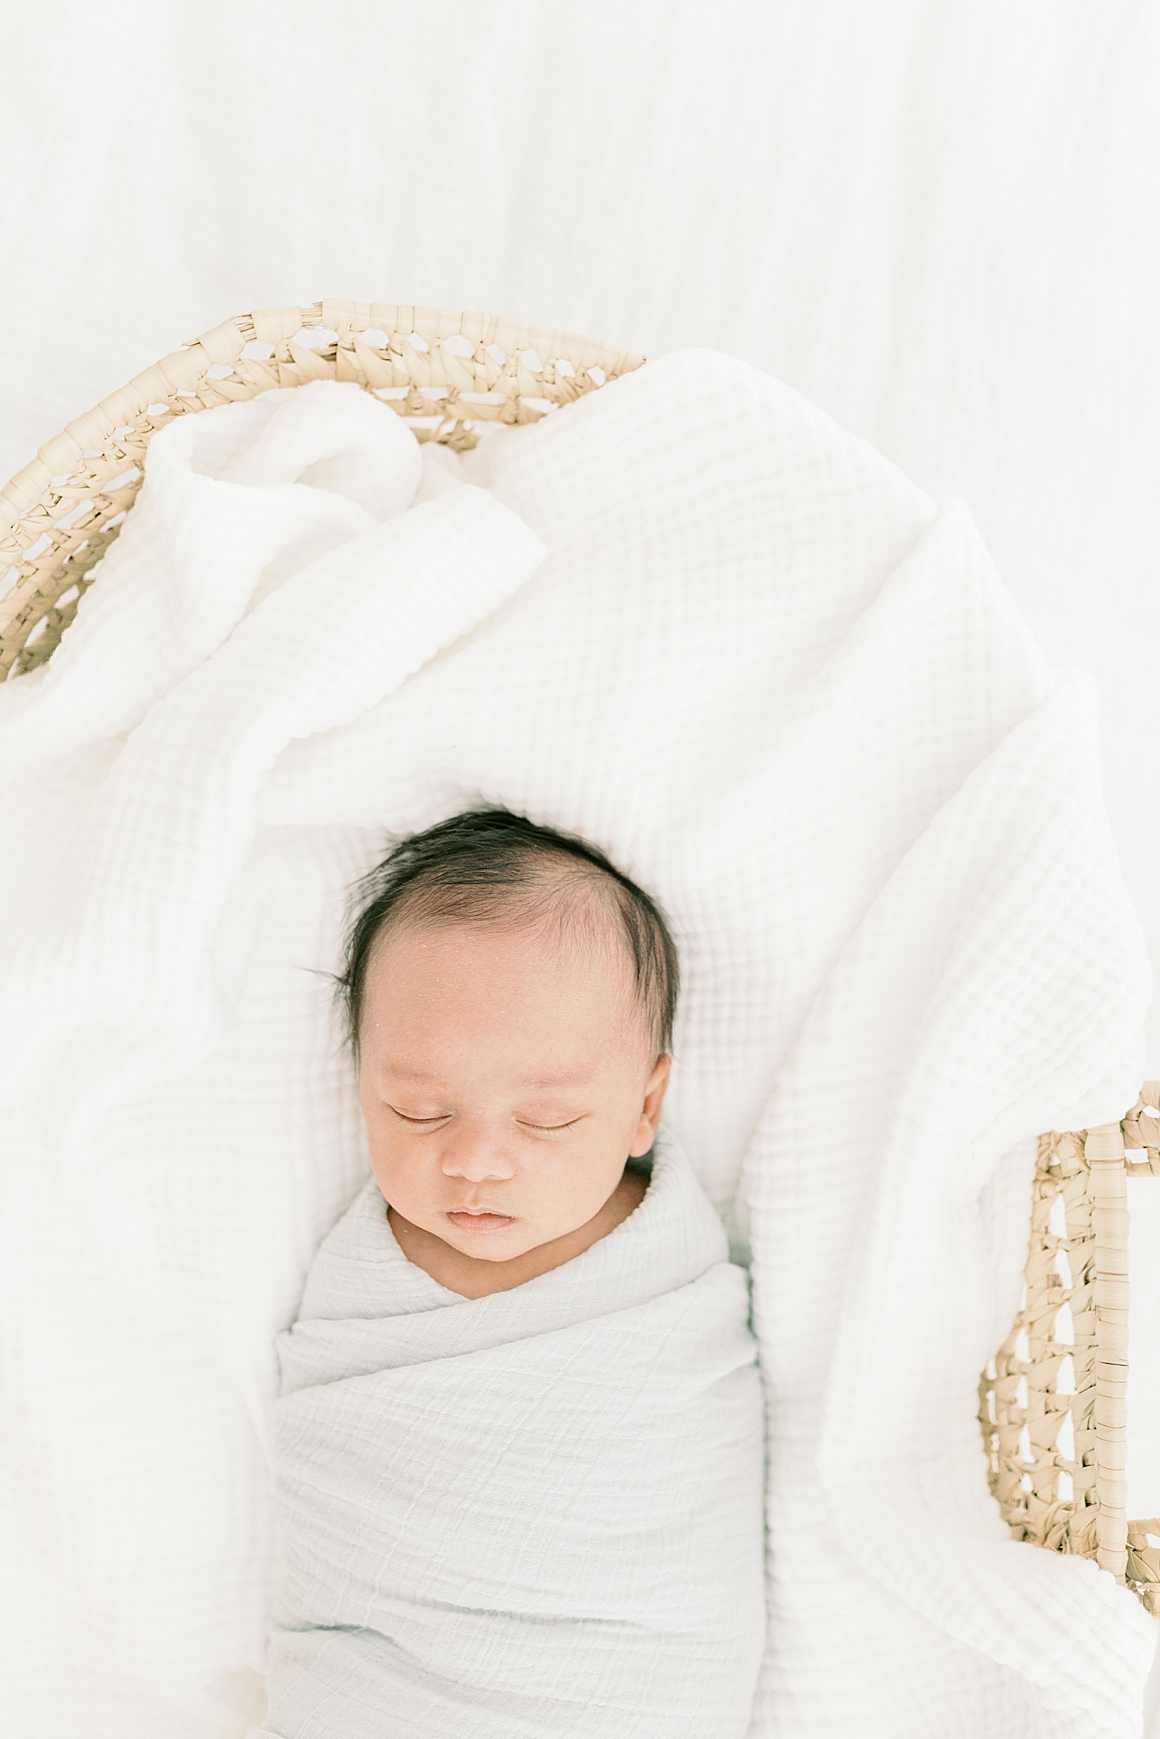 Baby swaddled in Moses Basket for in-home newborn session. Photos by Charleston Newborn Photographer, Caitlyn Motycka Photography.